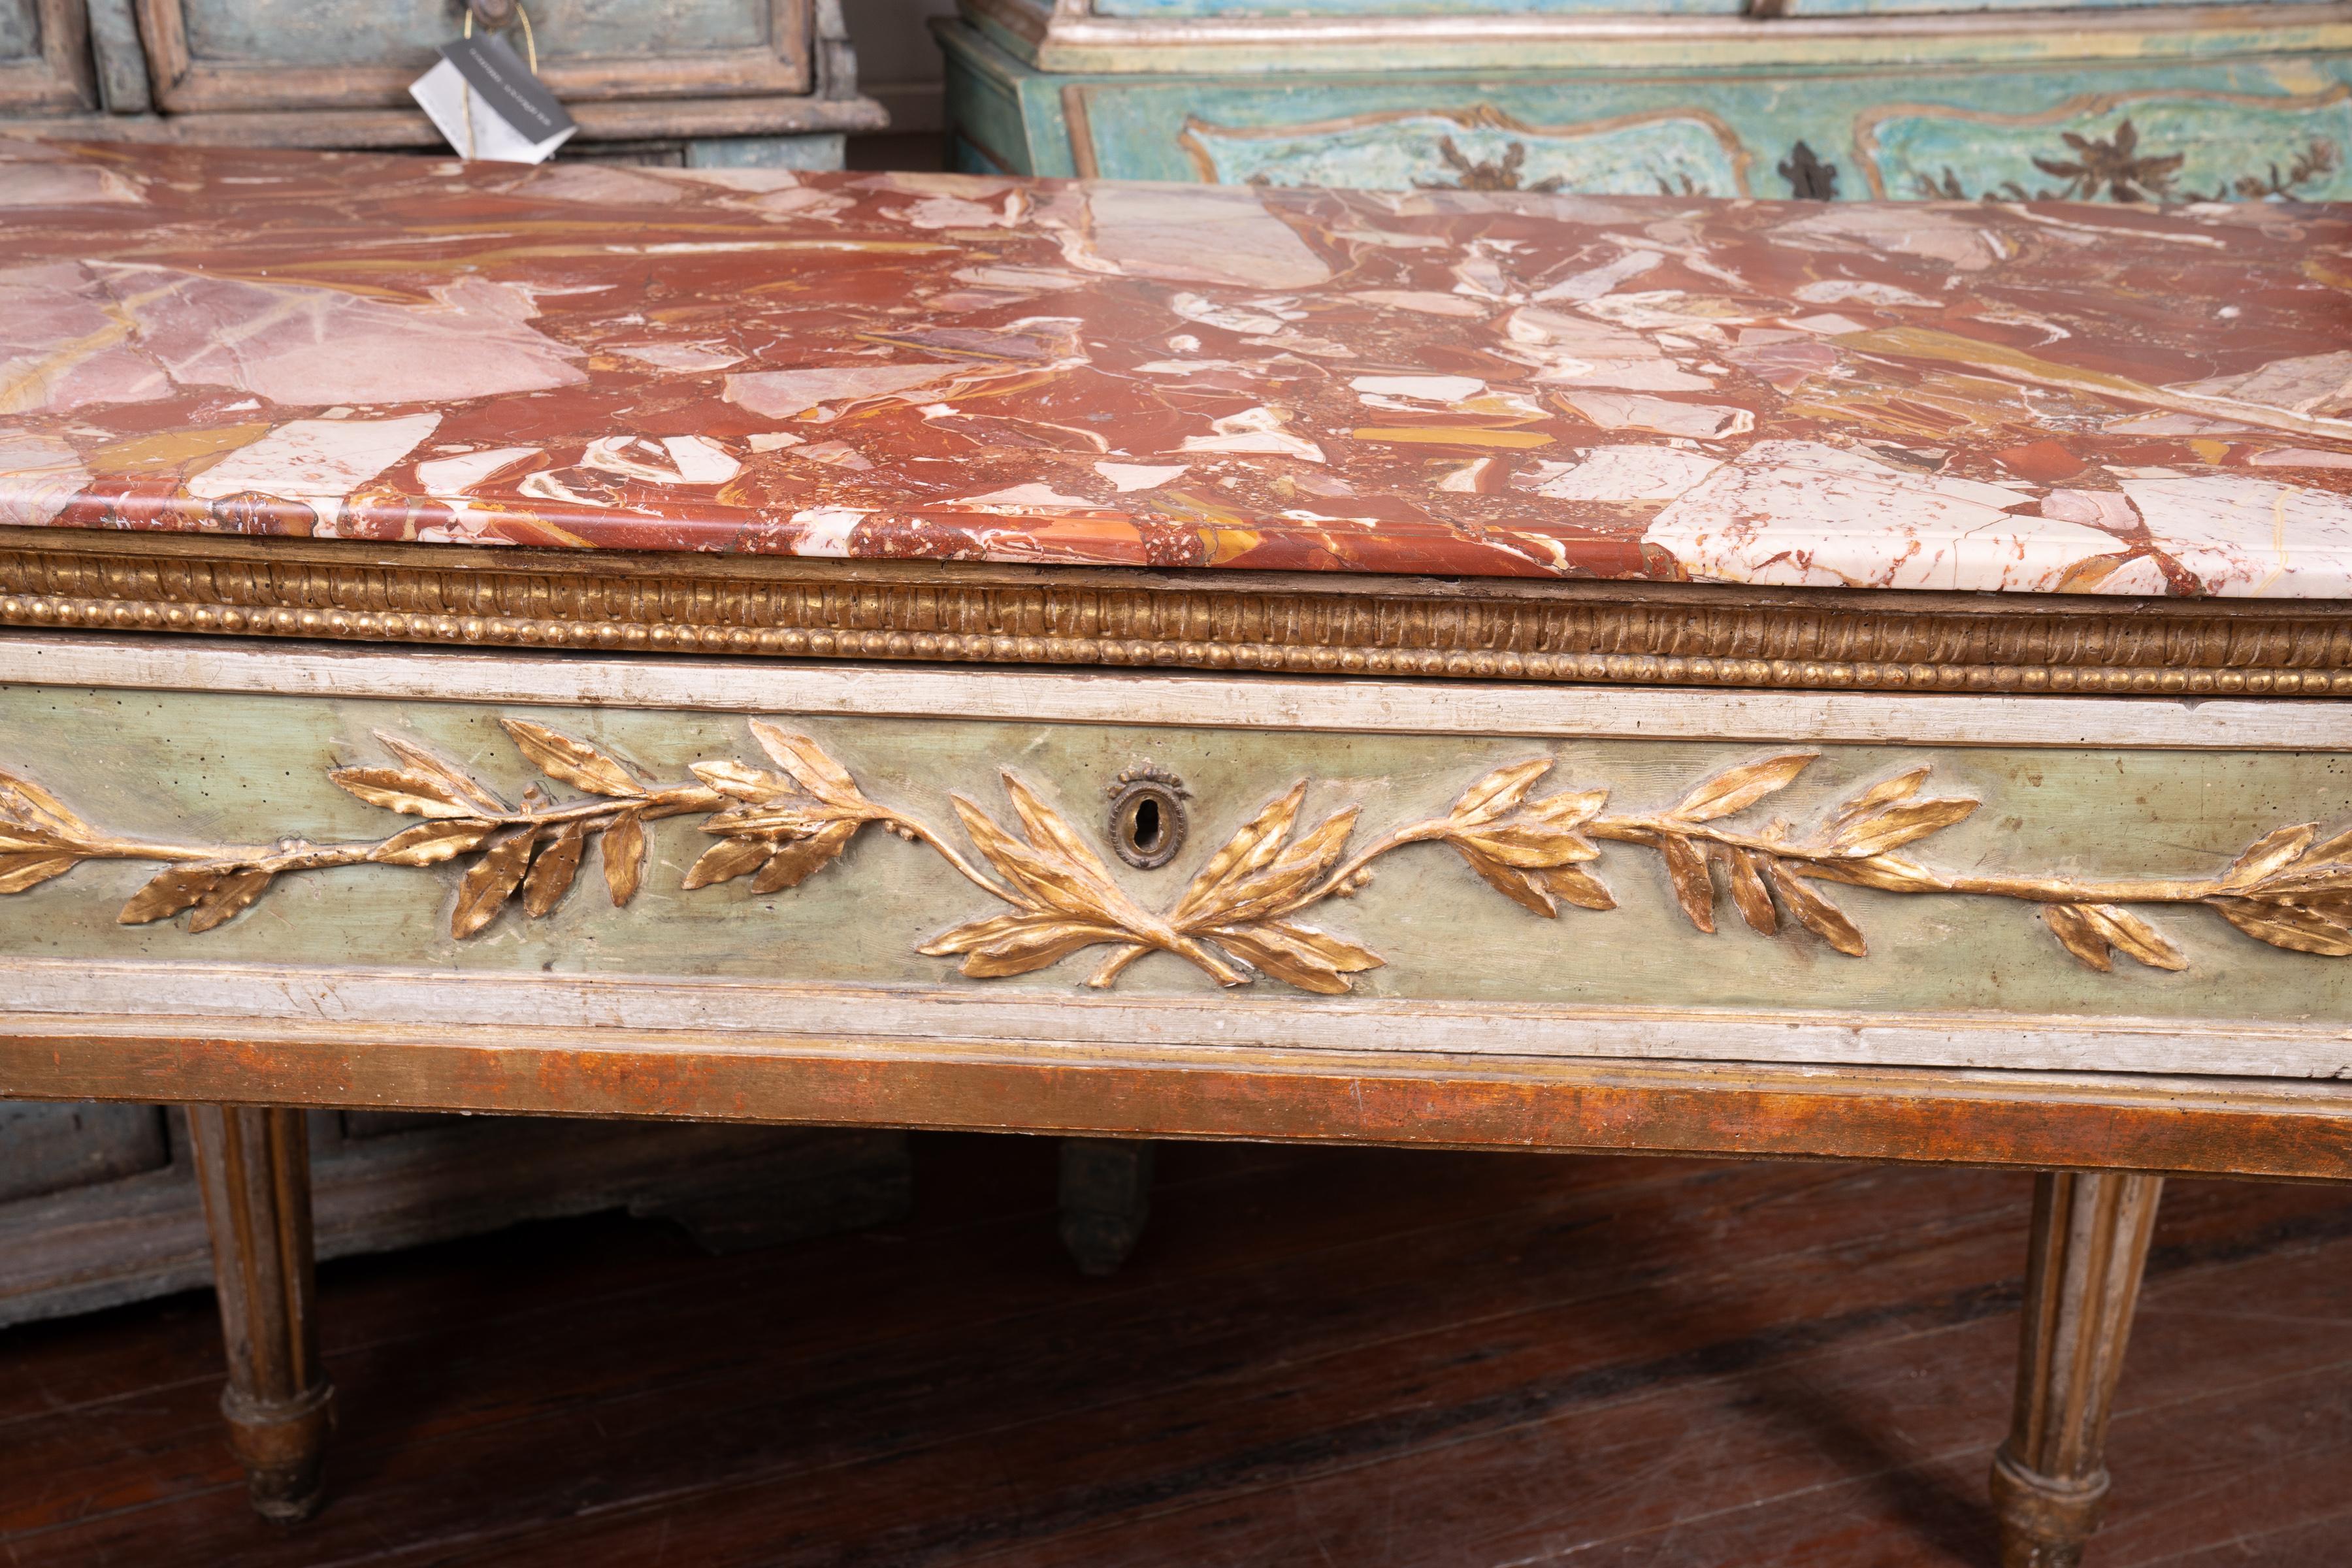 I present a fantastic 18th century painted and gilded Roman Console with a rare Italian marble top. This marble is no longer mined  but it is in the family of Il Marmo Rosso Agadir.This console shows the finest 18thc carved wood elements with parcel